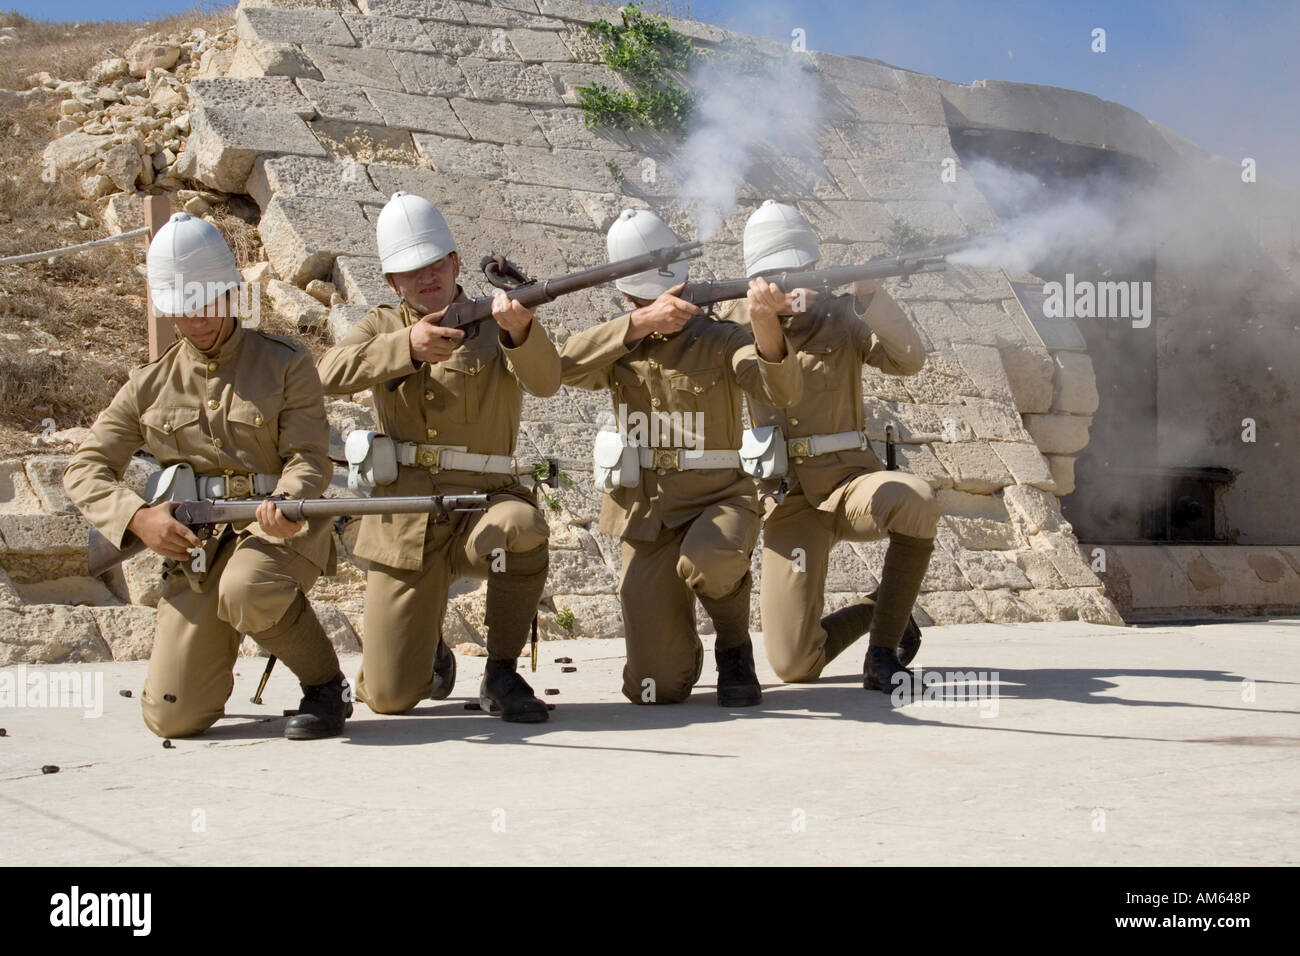 Actors dressed as soldiers in British colonial era uniforms fire a volley during a historical re-enactment at Fort Rinella, Malta Stock Photo